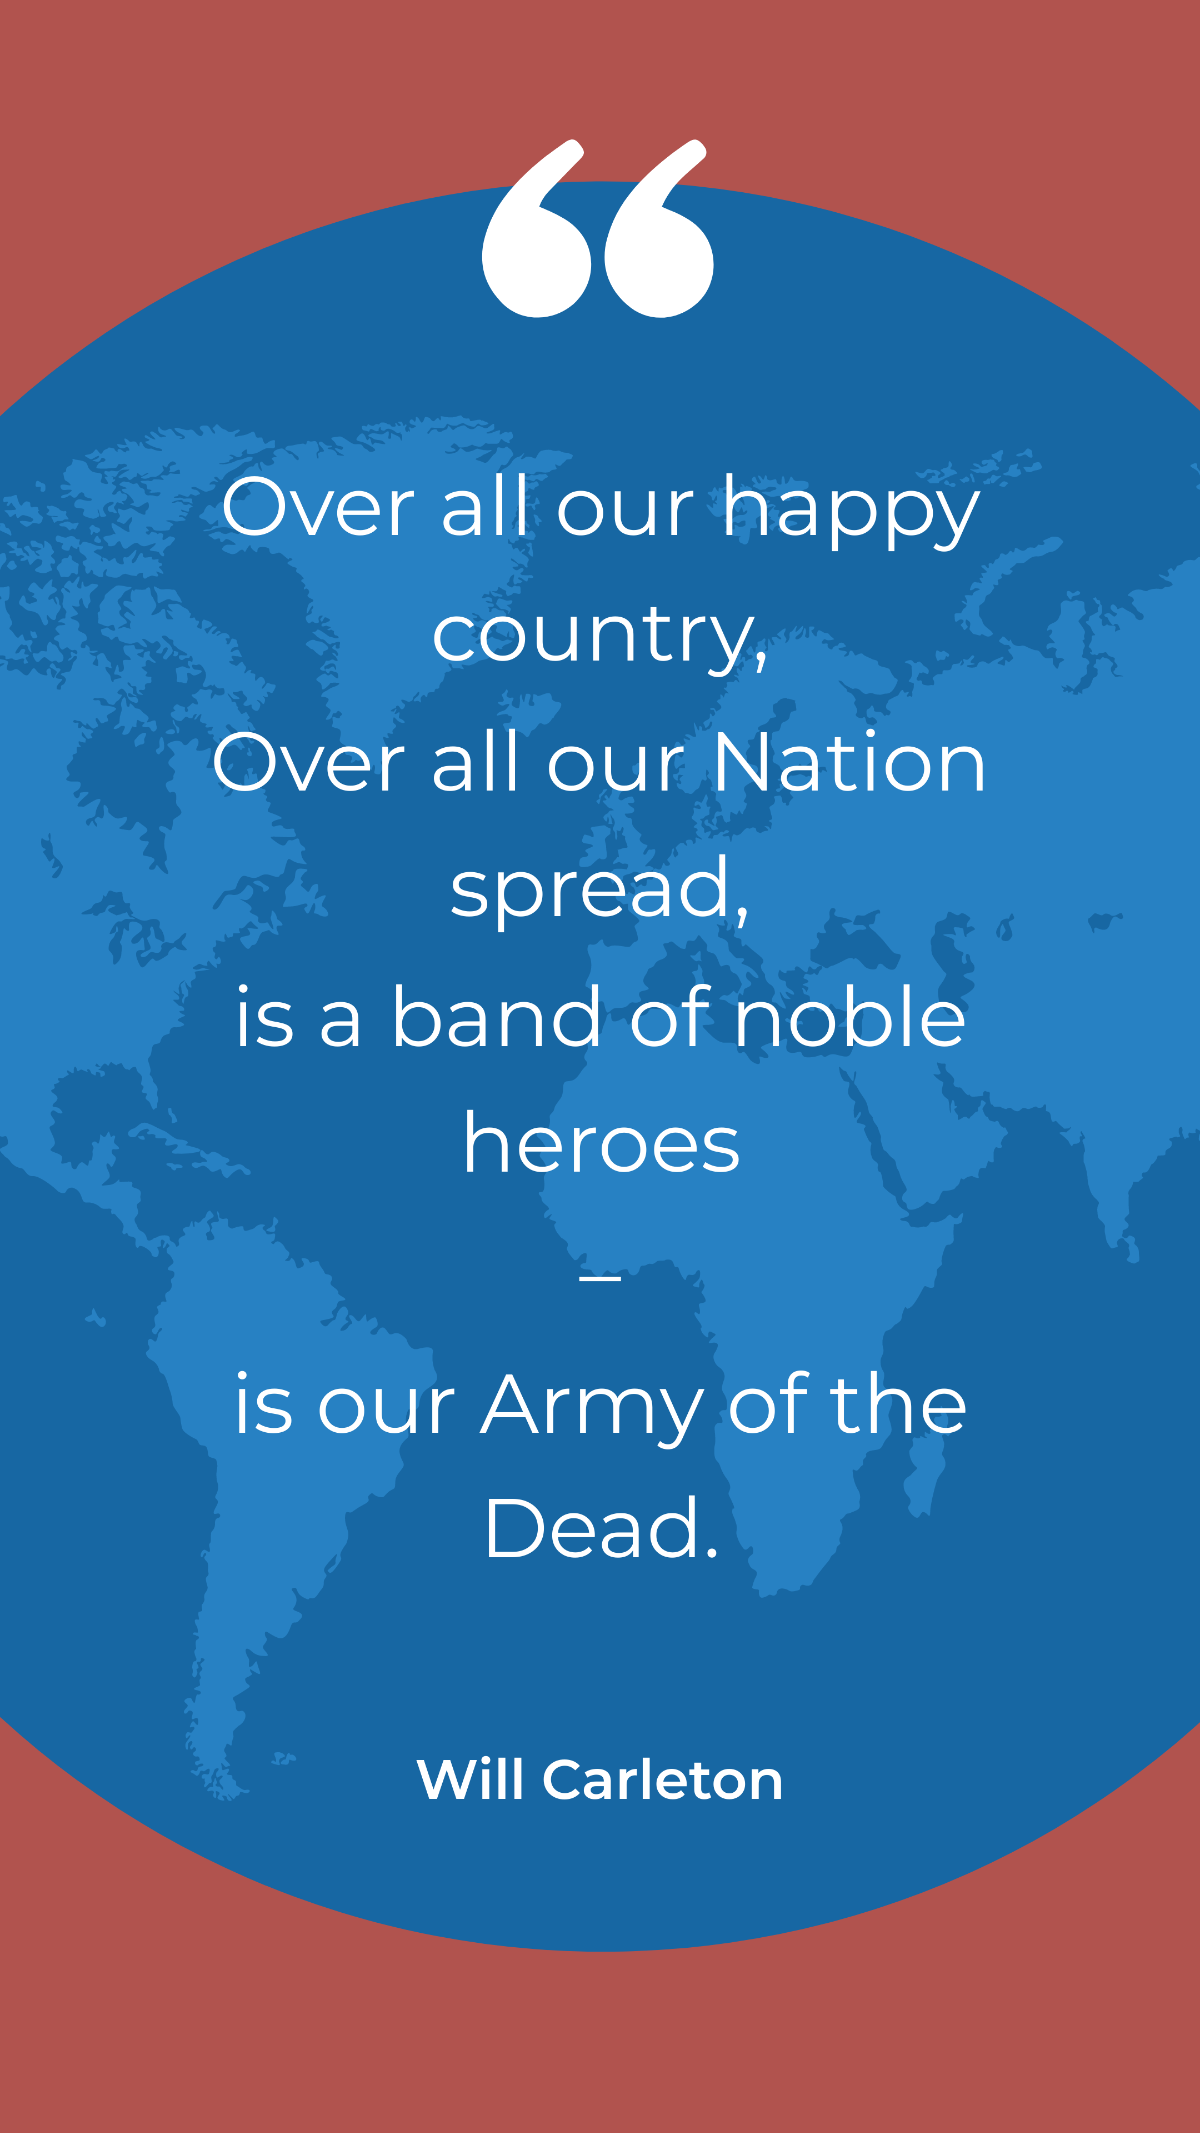 Will Carleton - Over all our happy country over all our Nation spread, is a band of noble heroes–is our Army of the Dead.